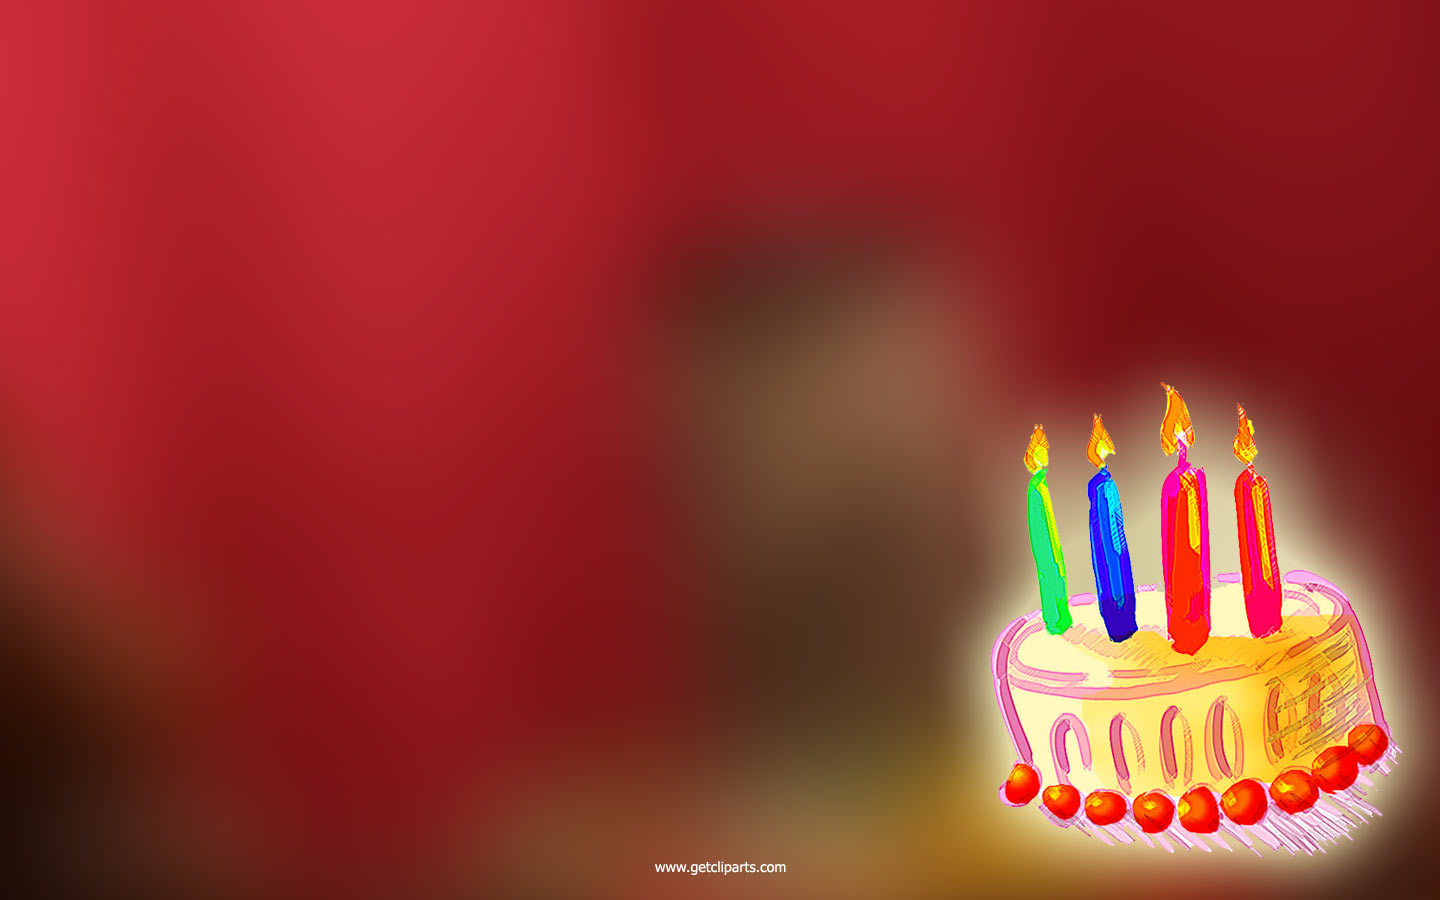 Birth Day PPT Backgrounds